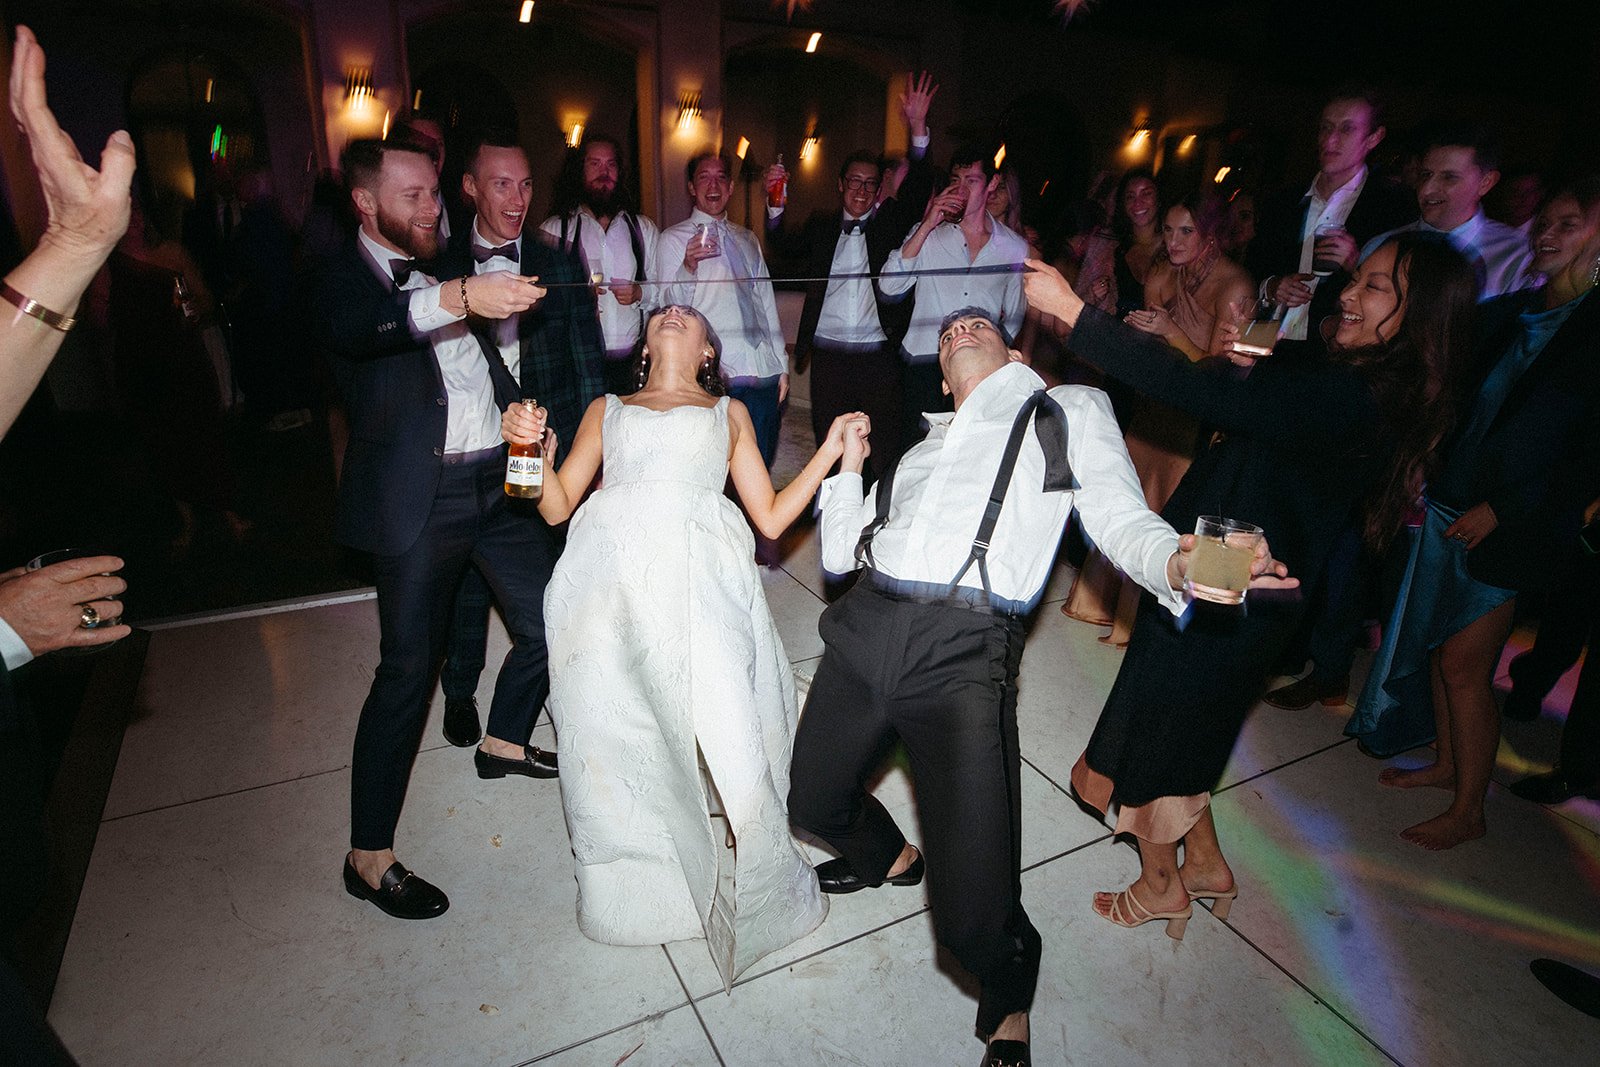  fun wedding after party celebration bride and groom wedding dancing 